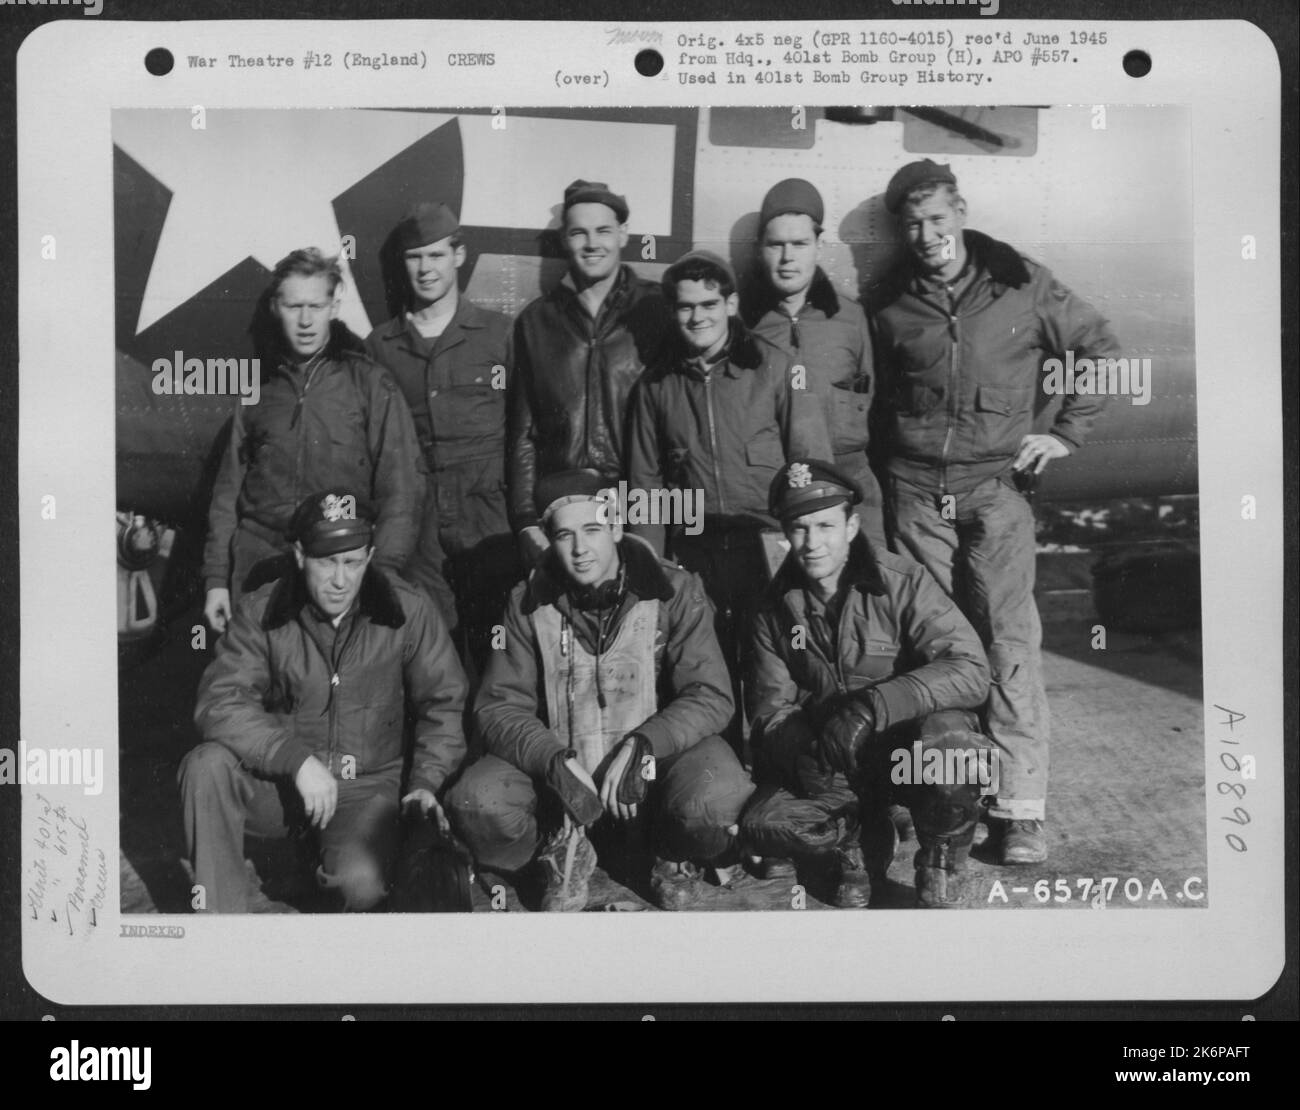 Lt. Udy And Crew Of The 615Th Bomb Squadron, 401St Bomb Group, Beside A Boeing B-17 'Flying Fortress' At An 8Th Air Force Base In England, 31 October 1944. Stock Photo